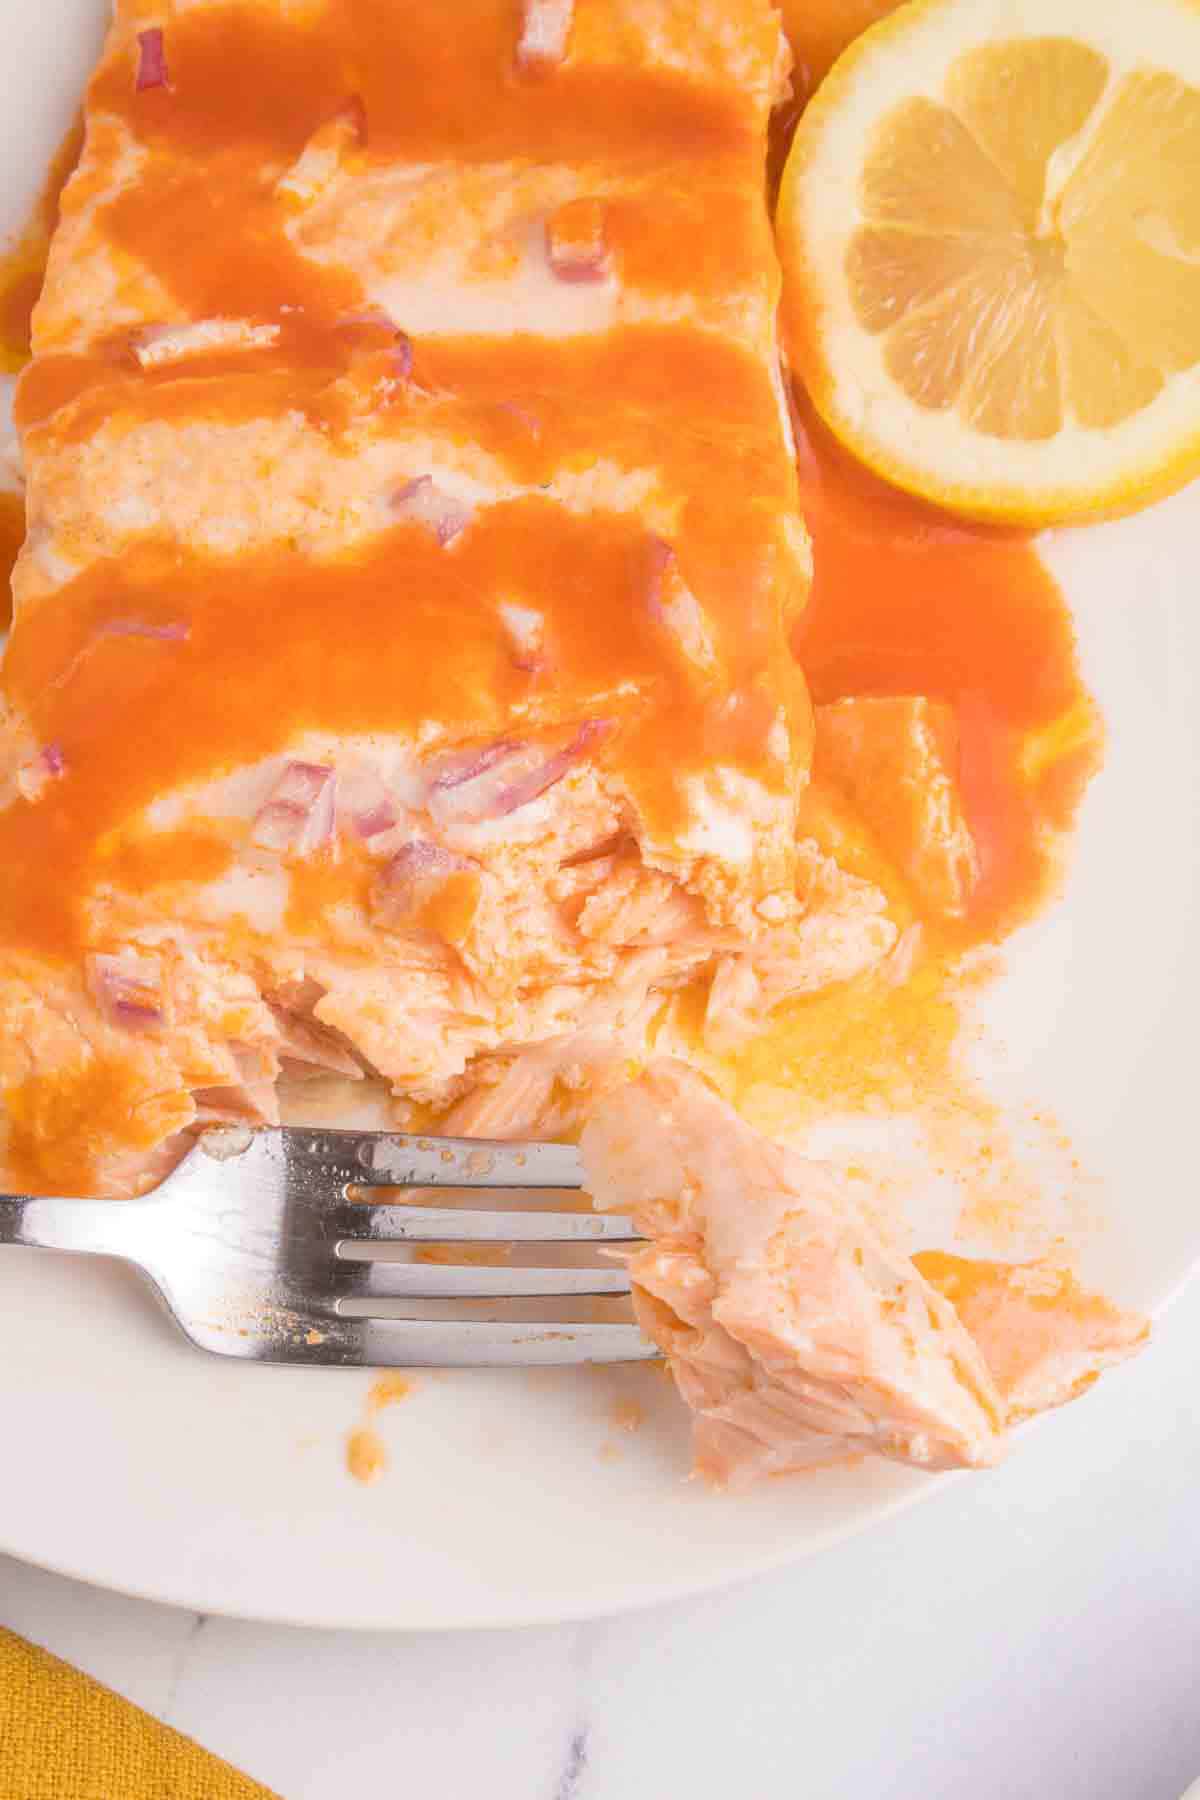 forkful of salmon from piece of salmon with Buffalo sauce and onions